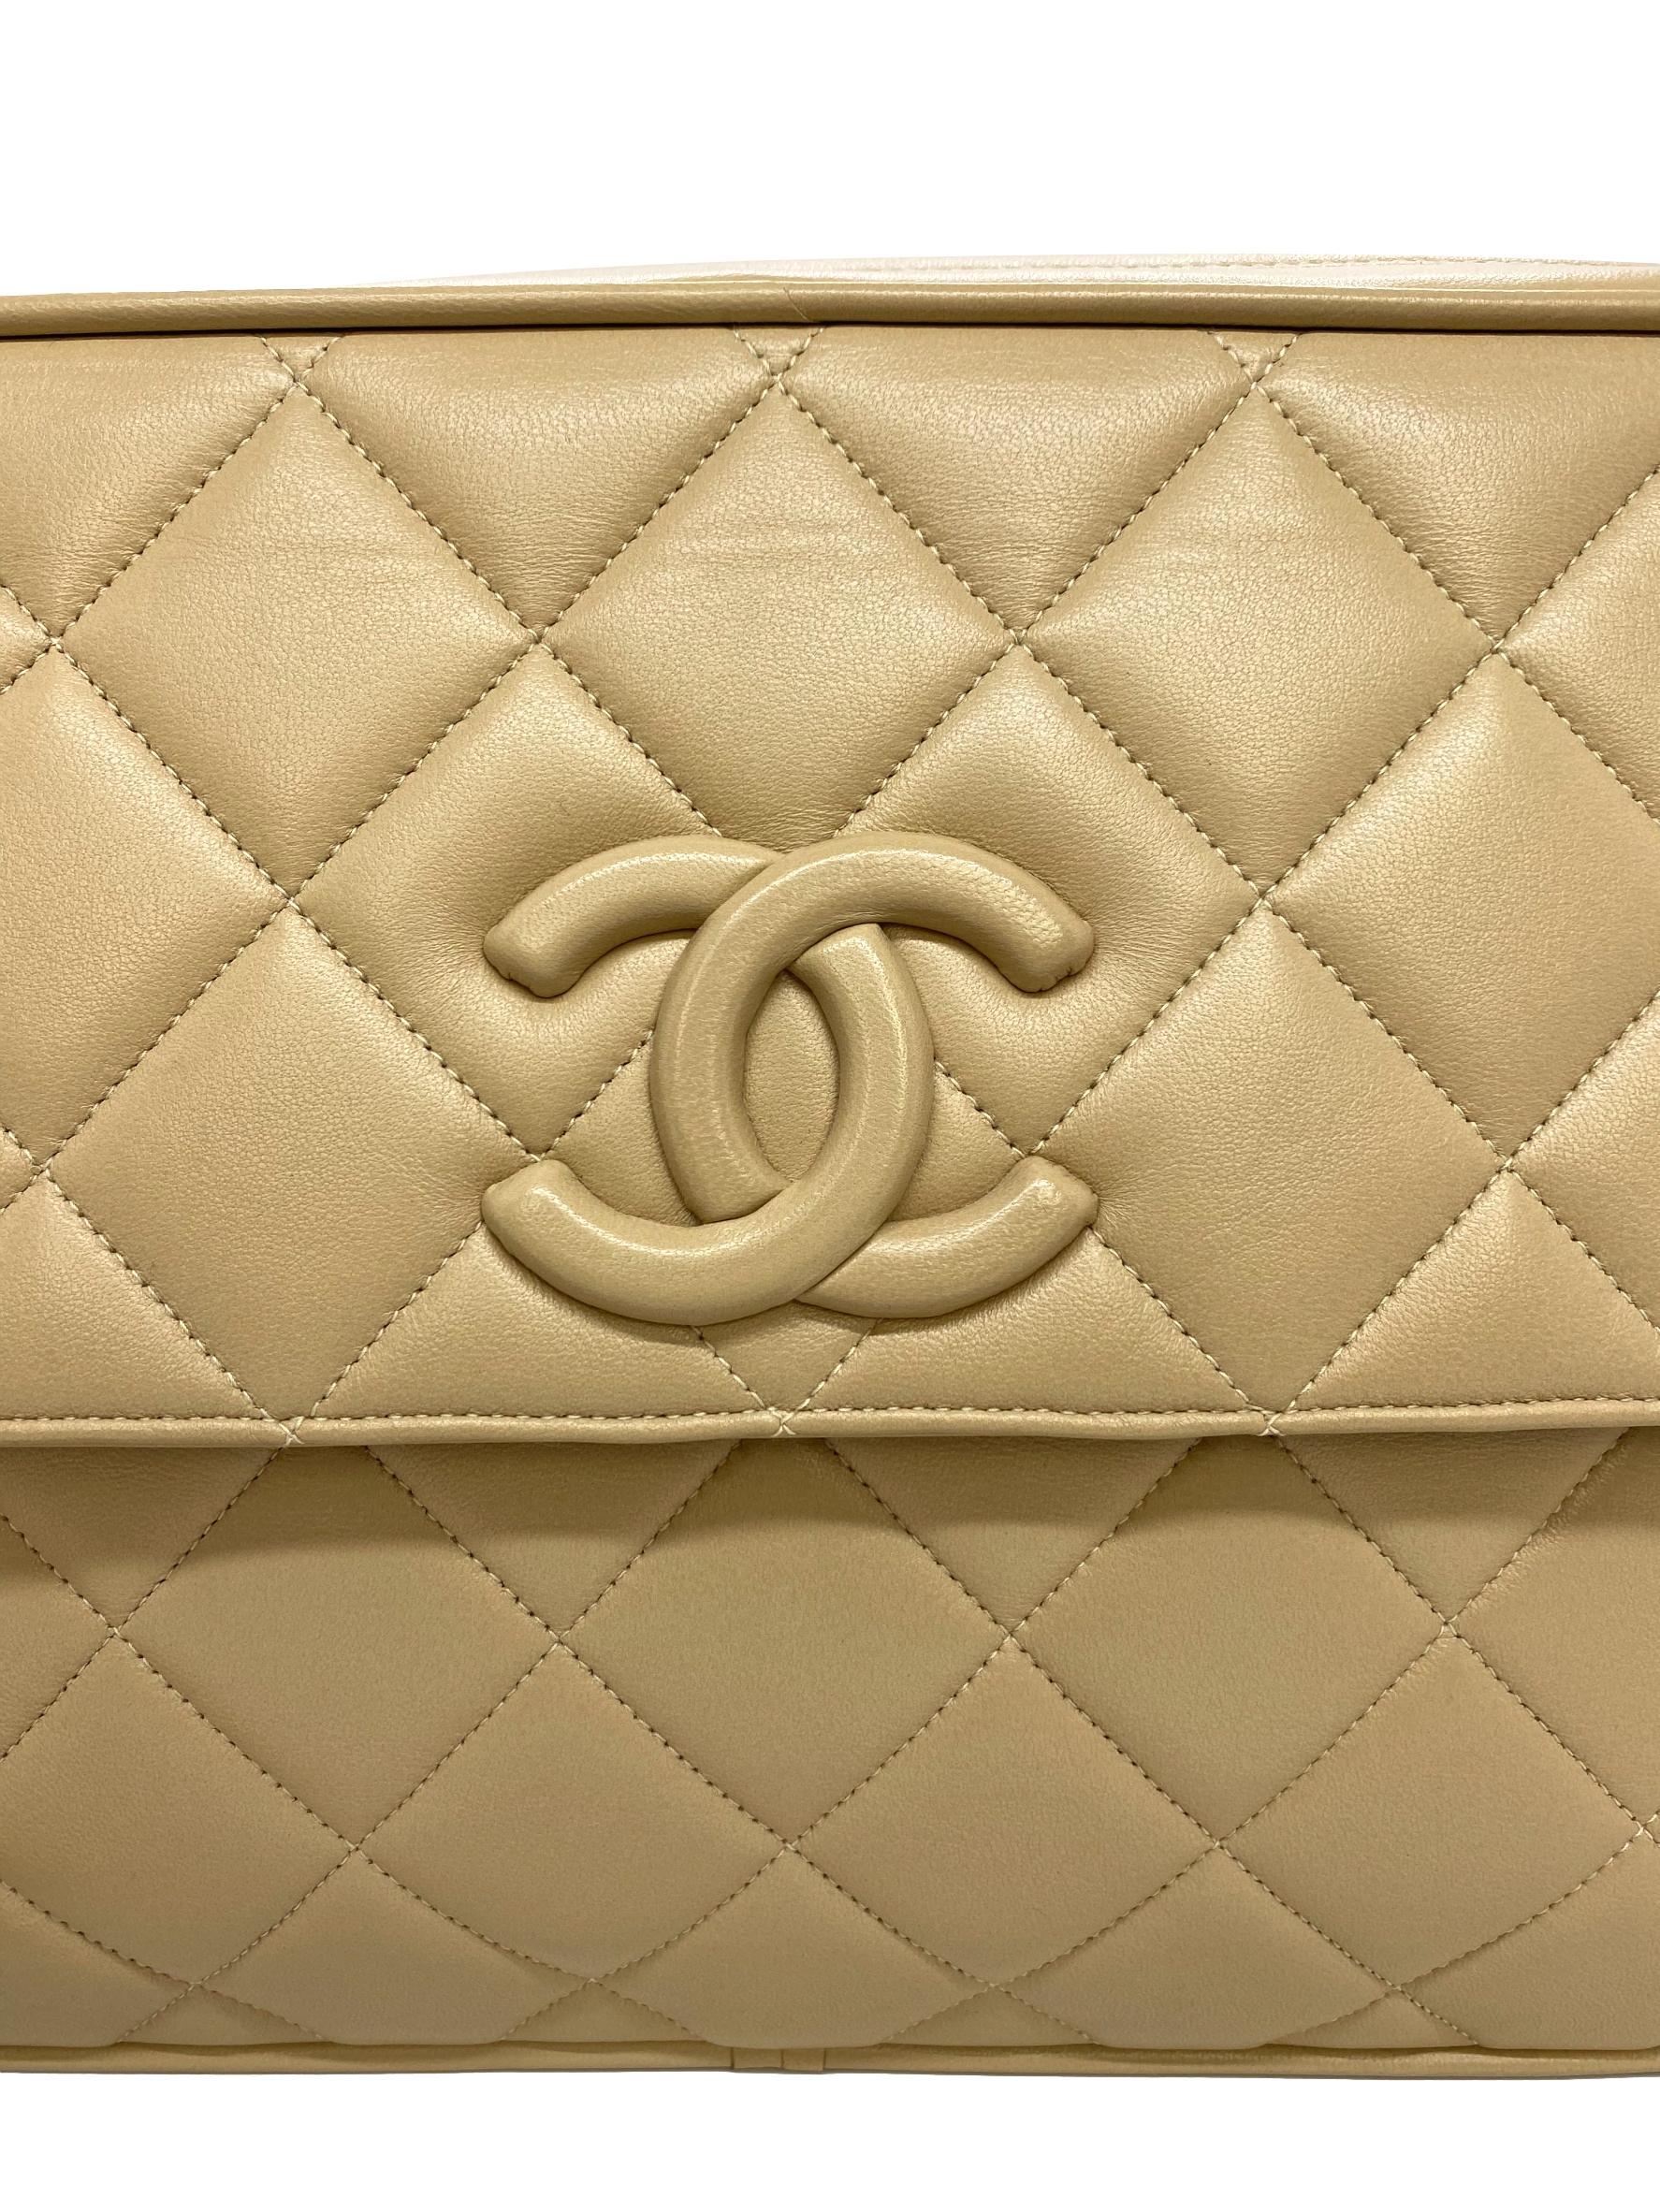  Chanel Vintage Beige Quilted Lambskin Leather Camera Bag with Gold Hardware 1